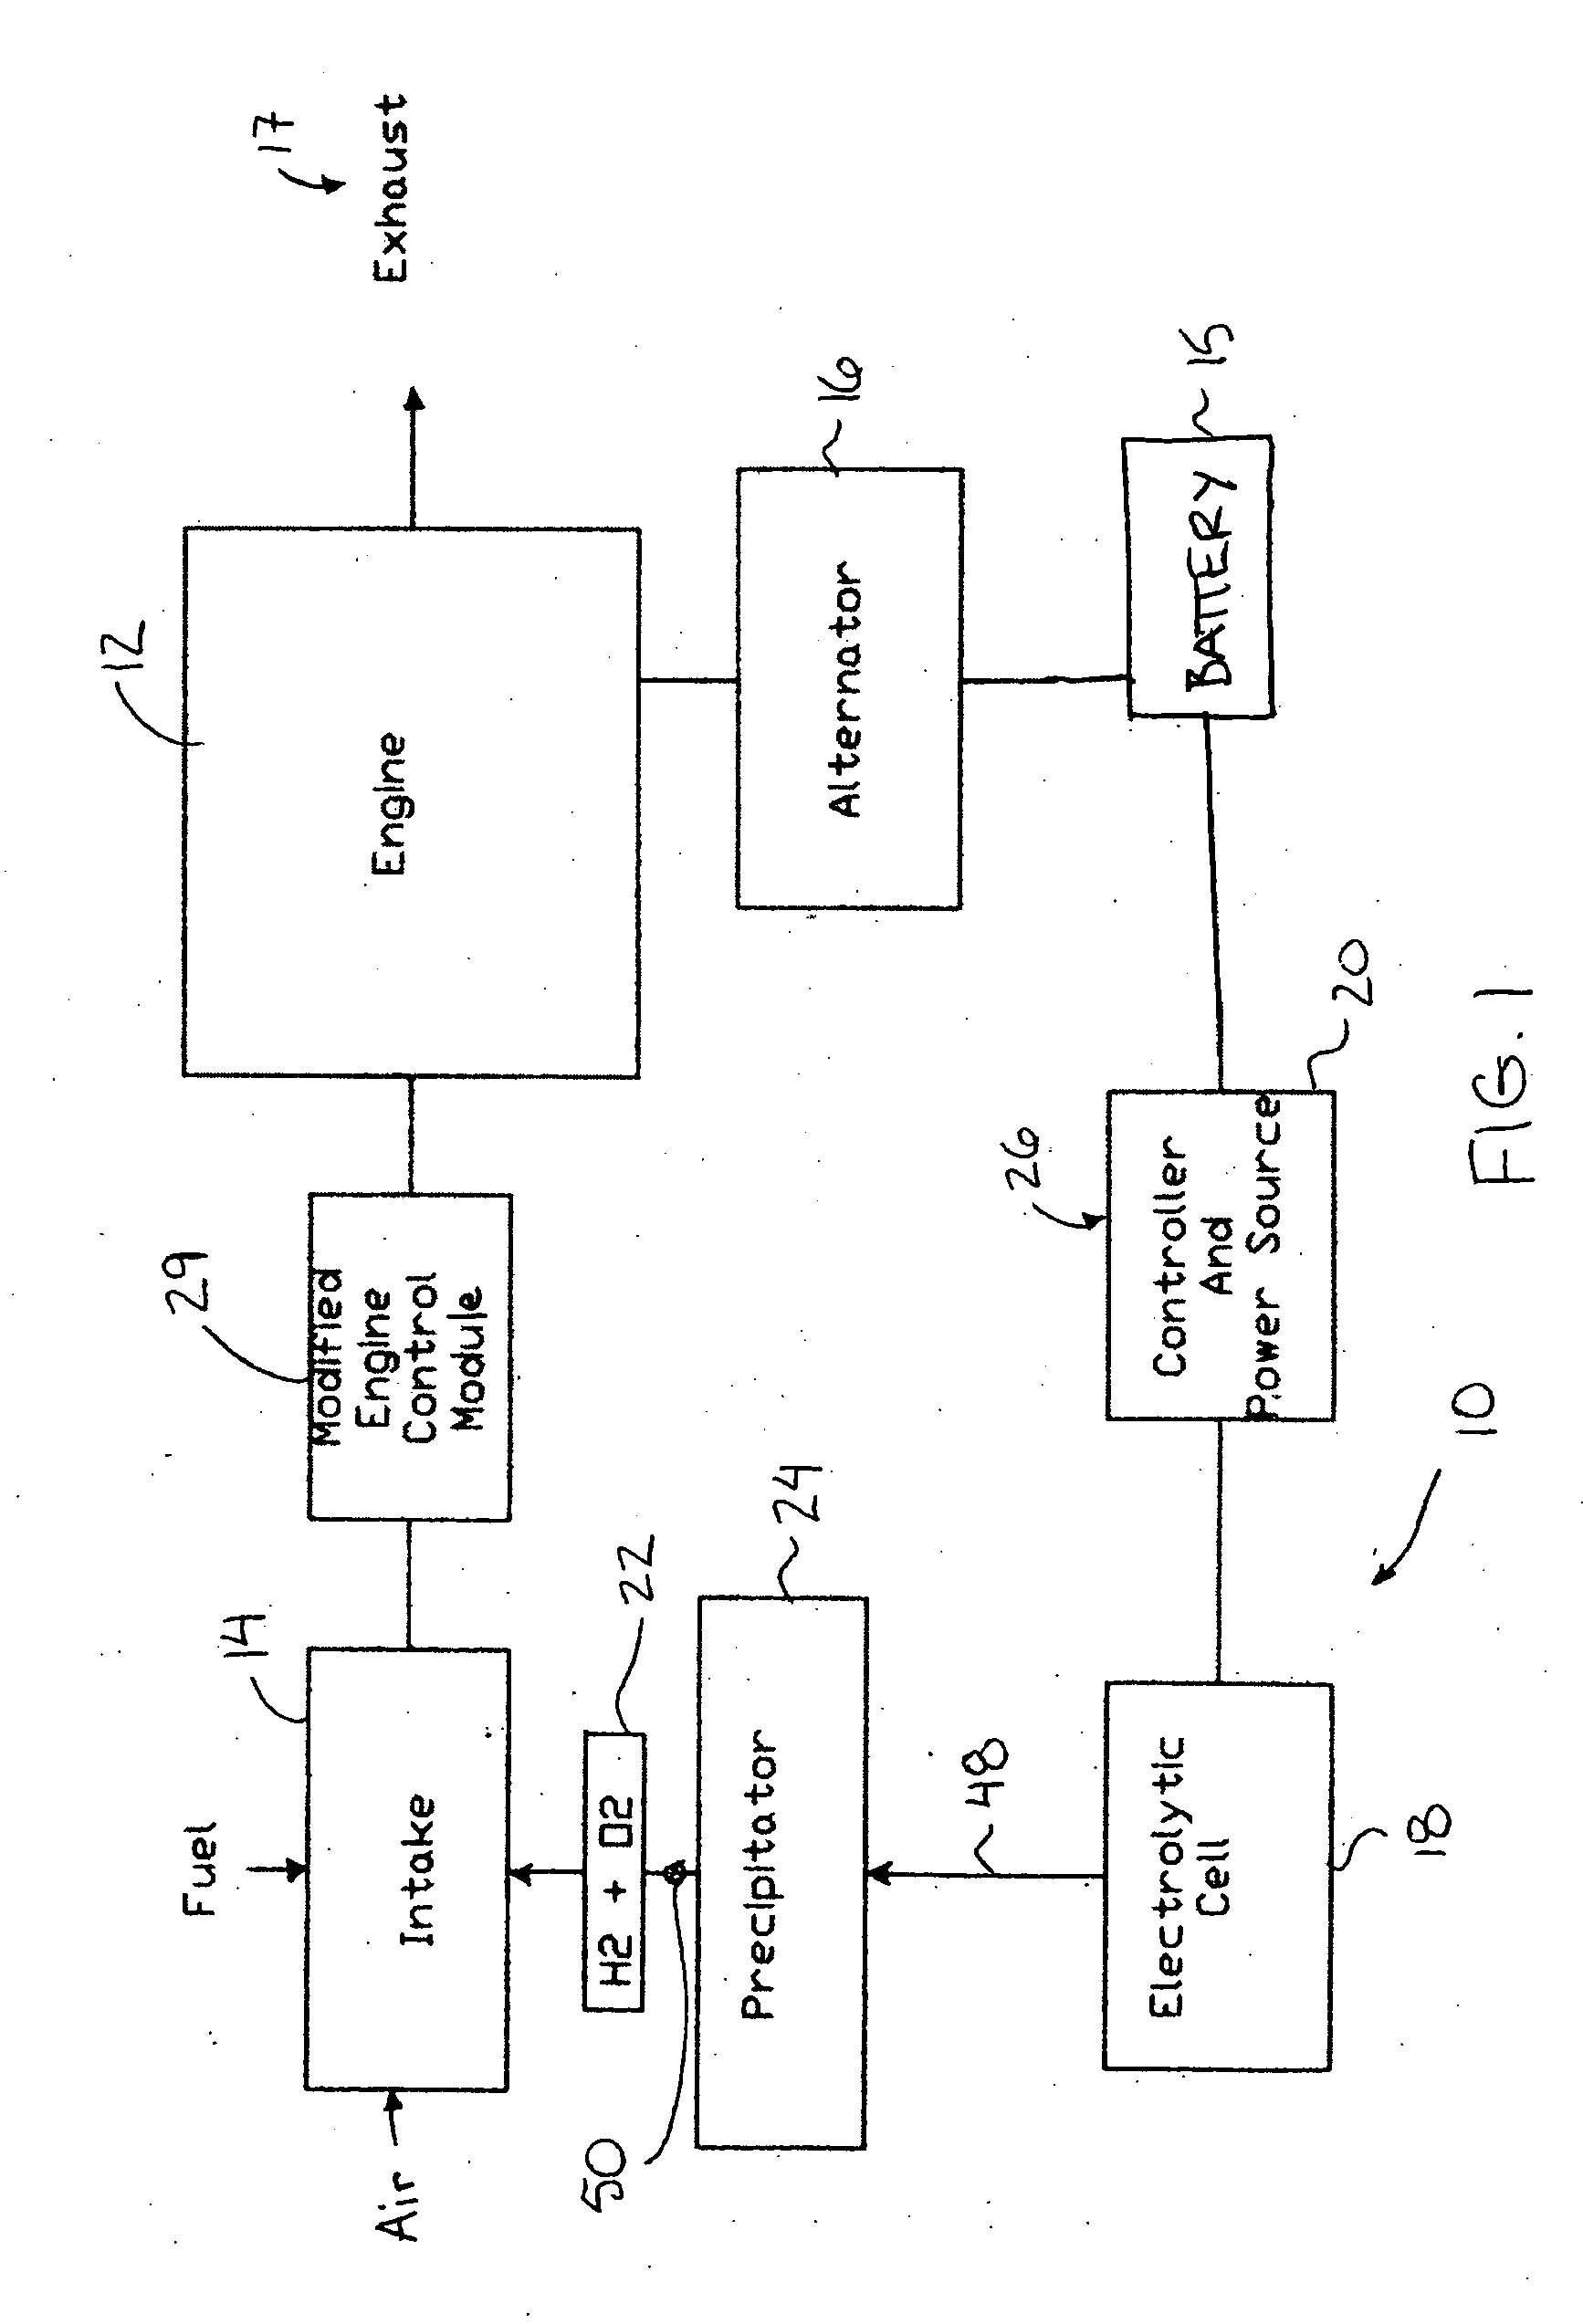 Electrolytic Cell for an Internal Combustion Engine